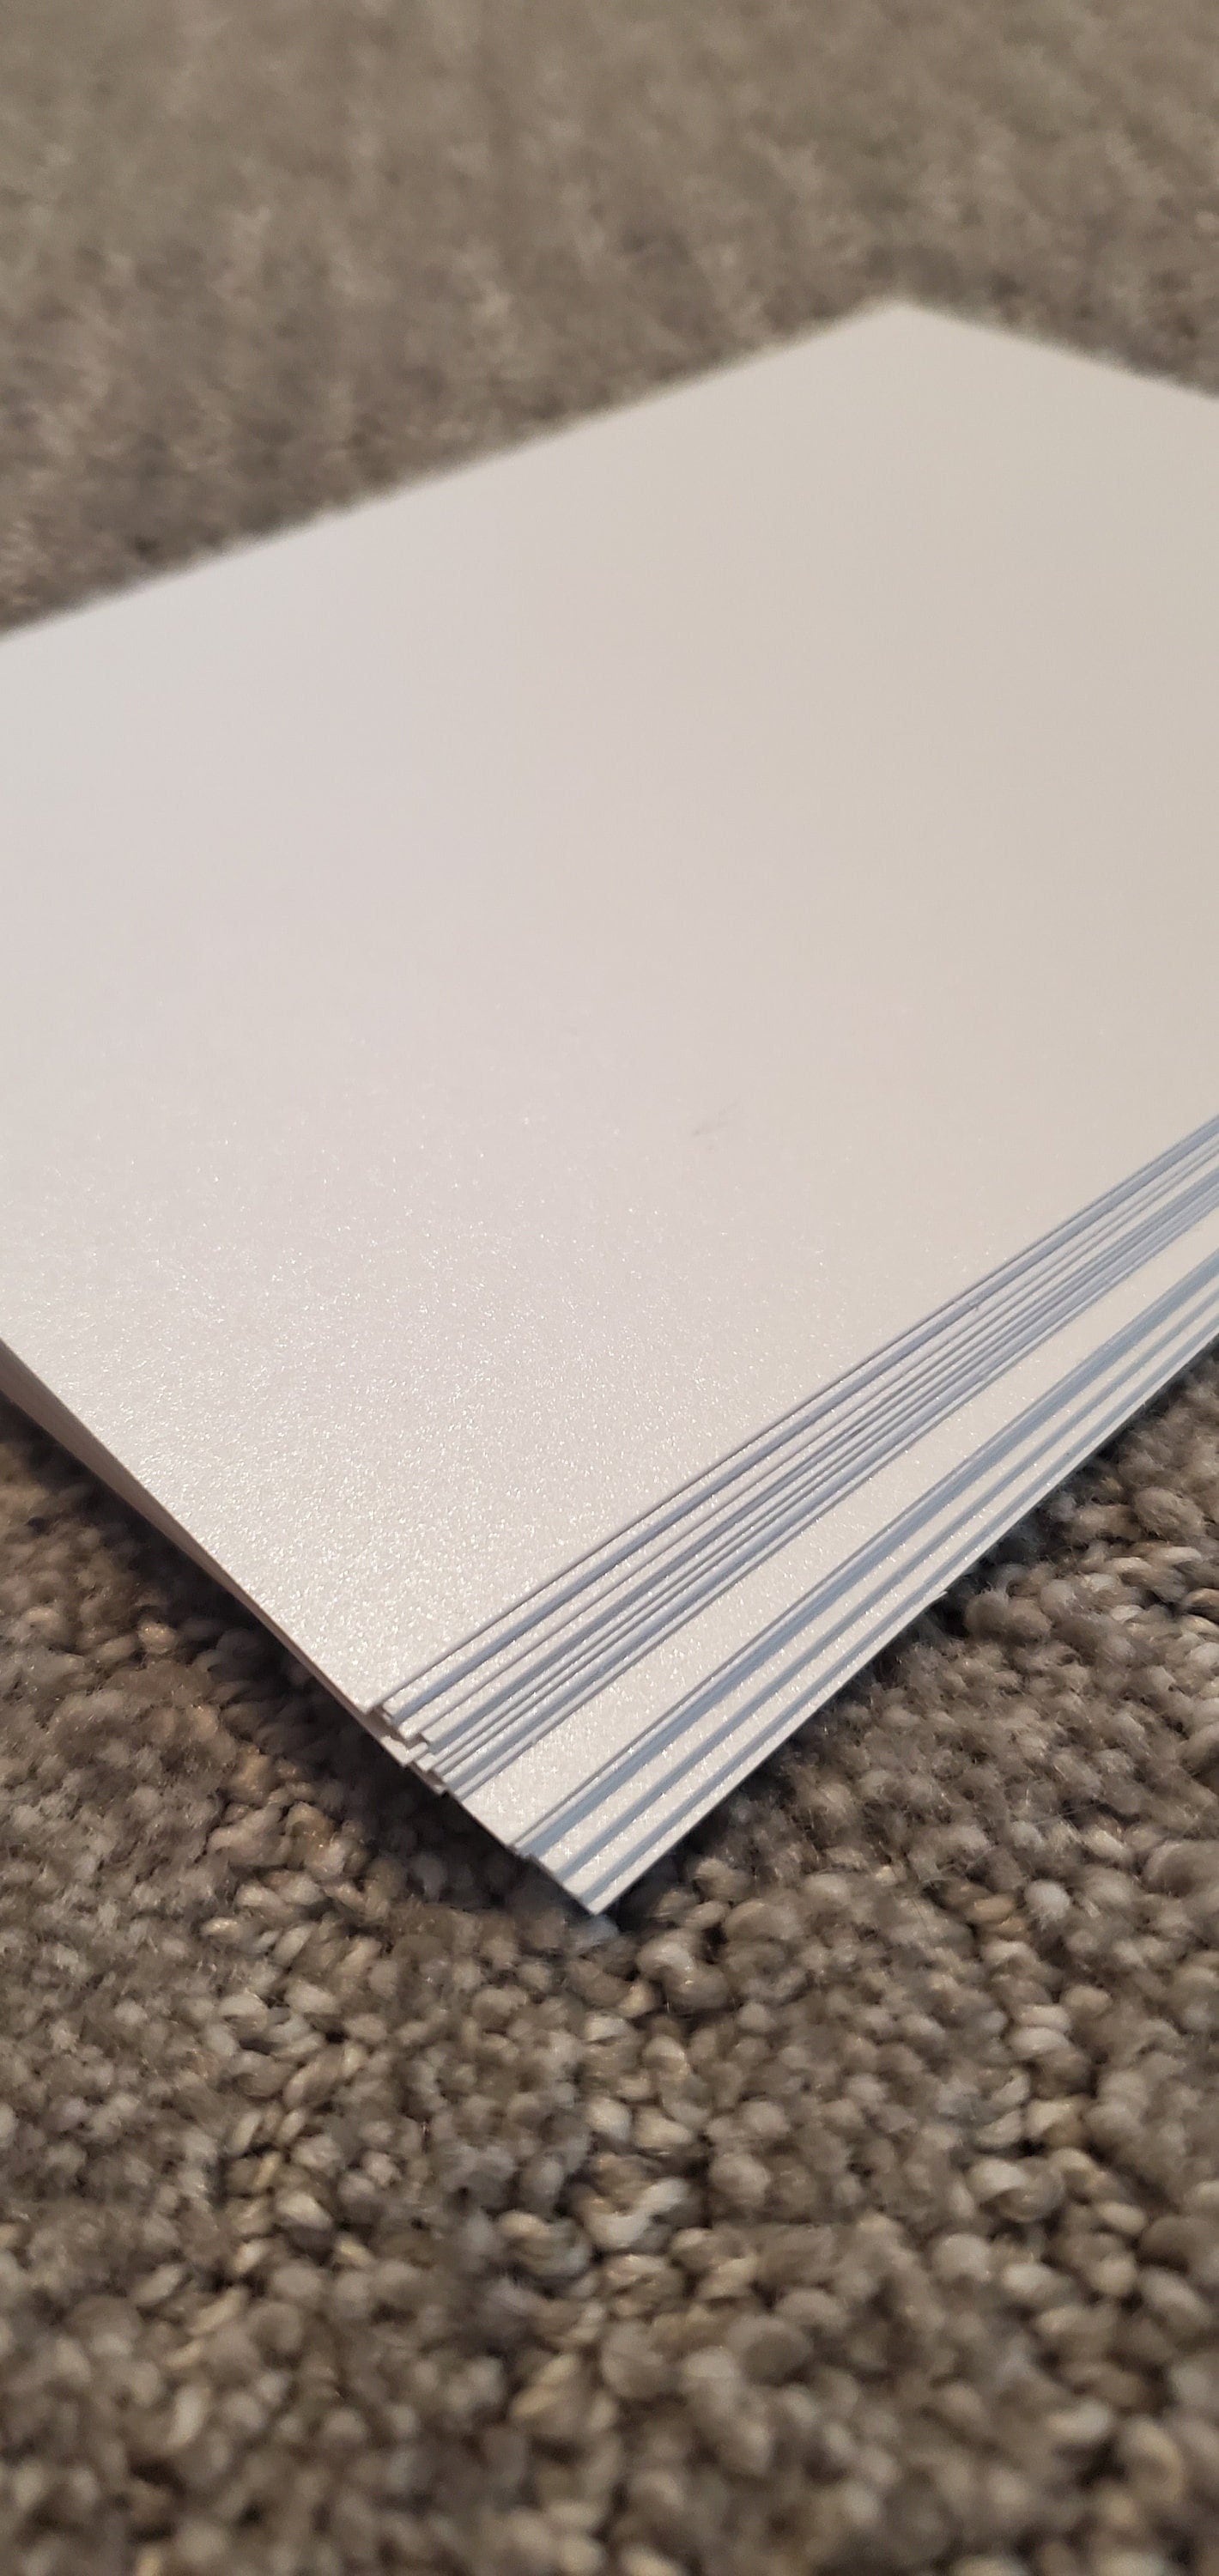 200 Gray Parchment 65lb Cover Weight Paper - 4 X 6 (4X6 Inches